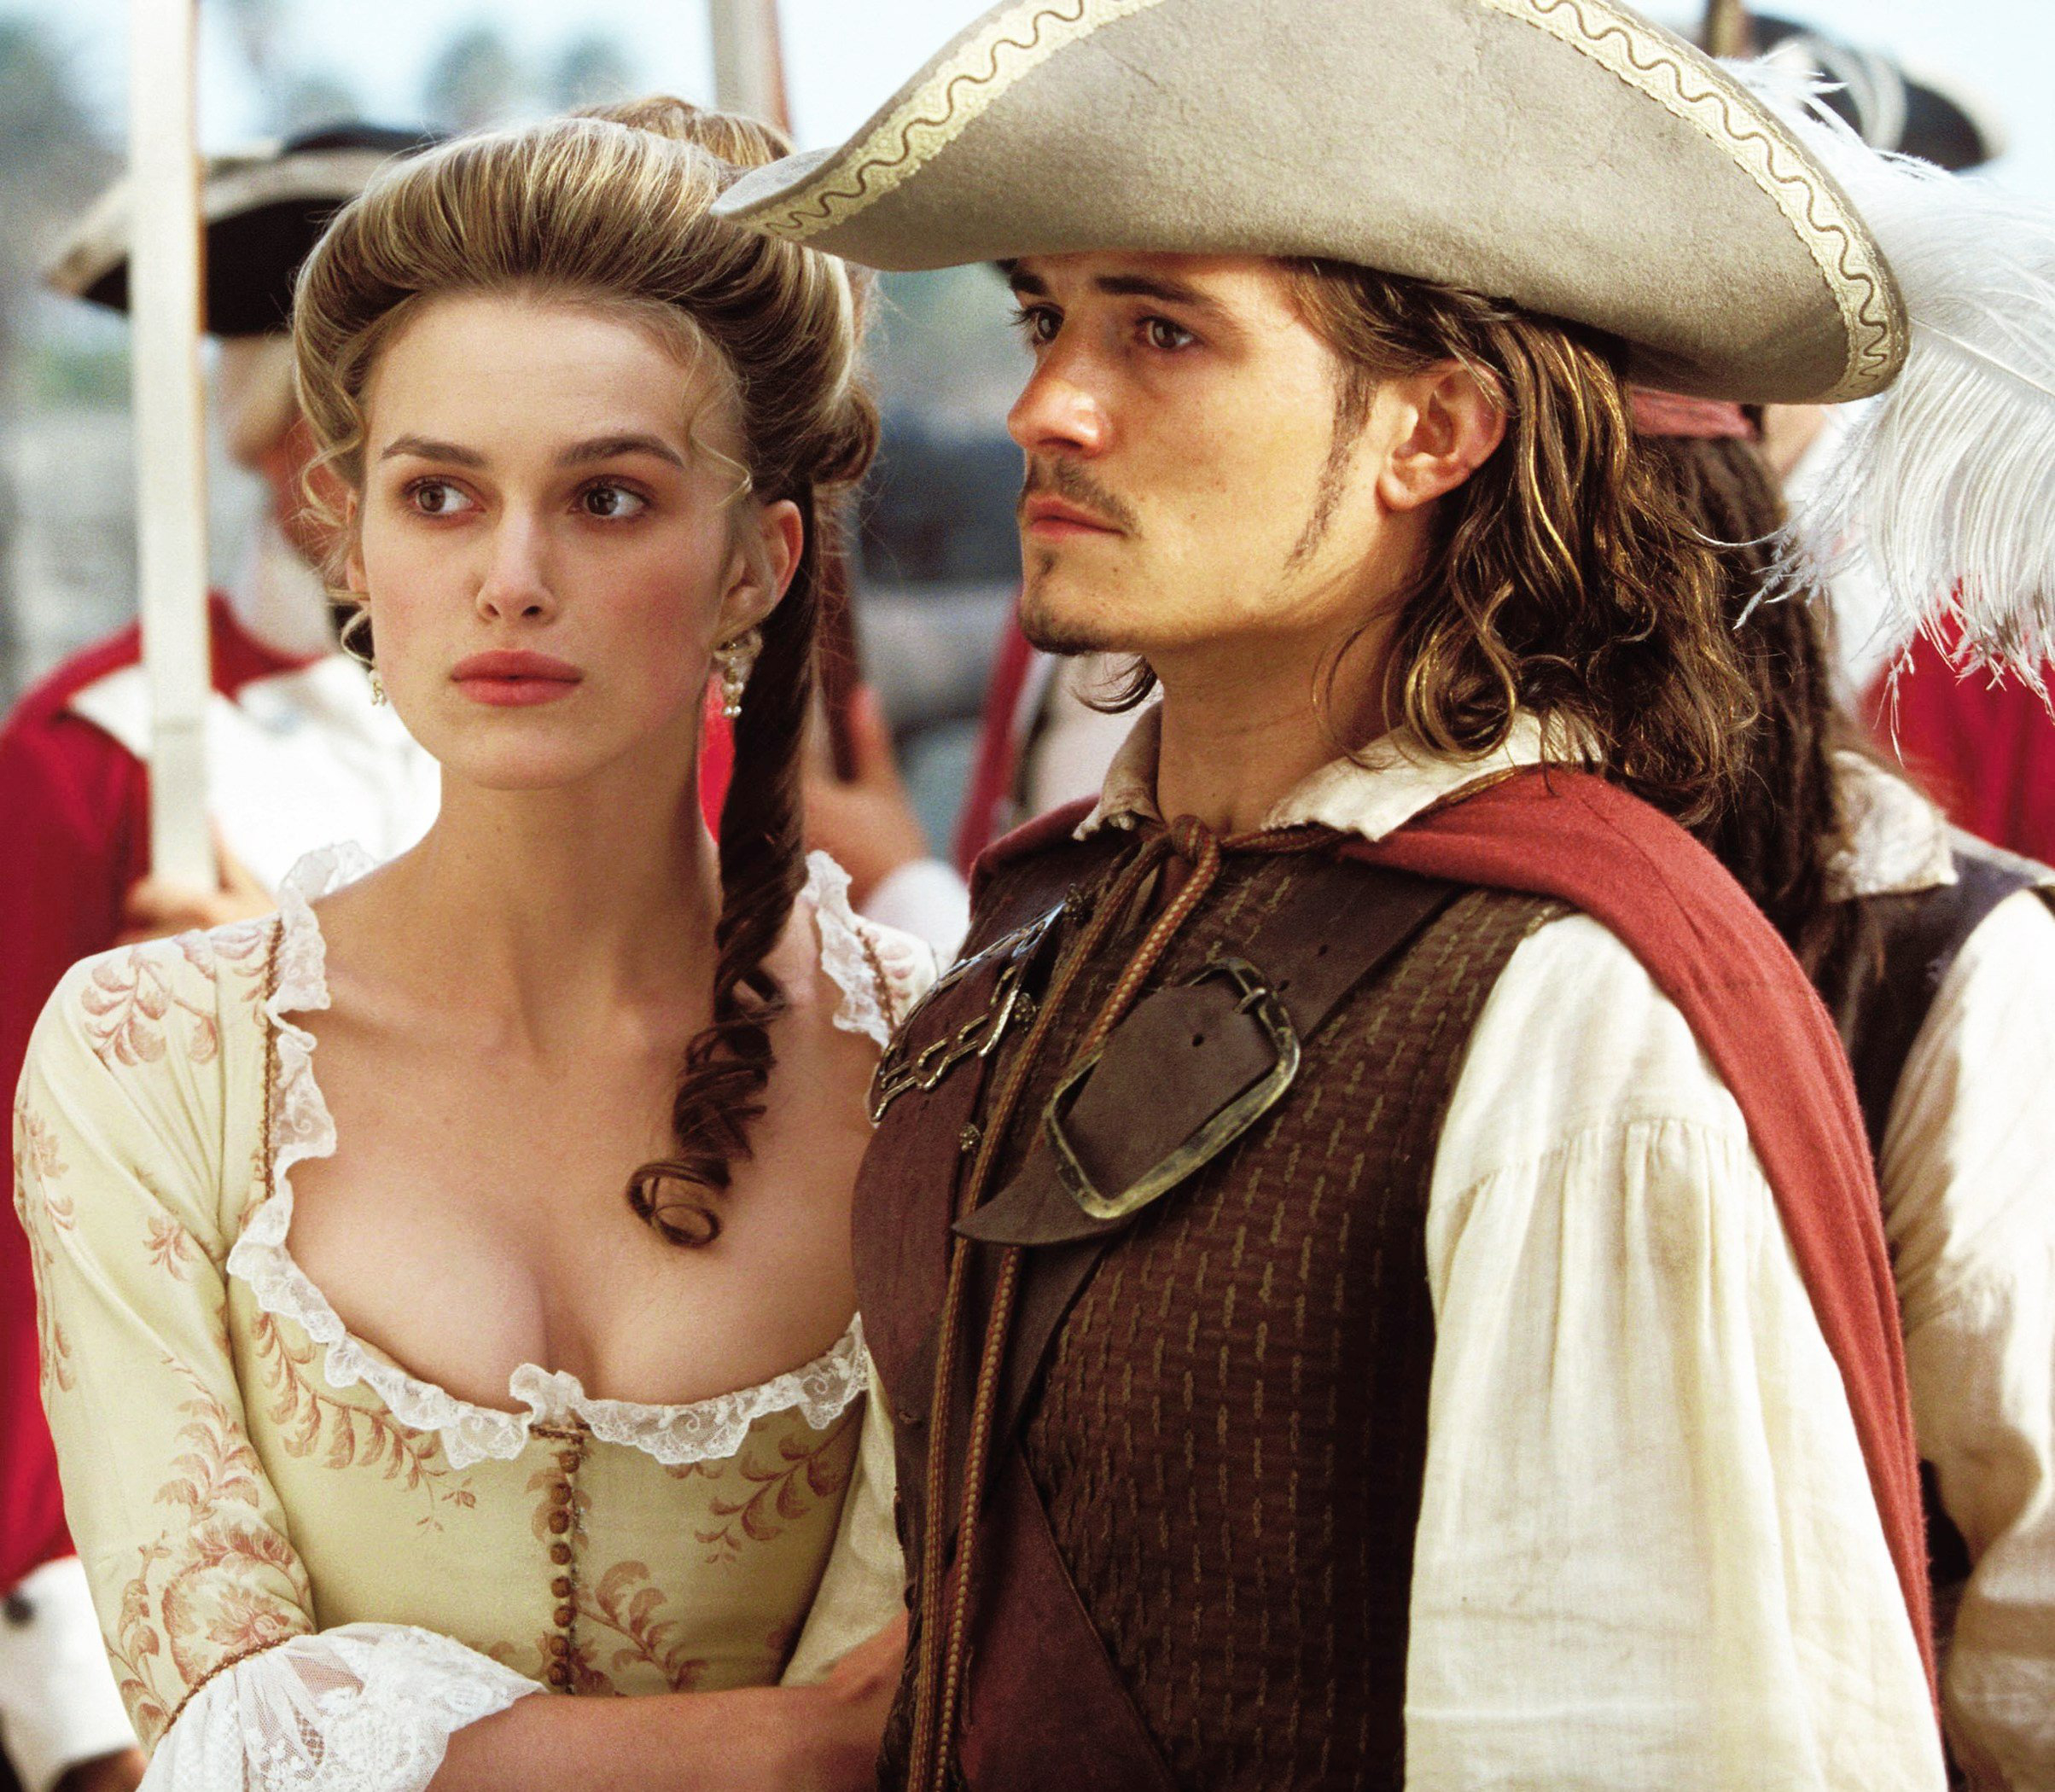 elizabeth swann, pirates of the caribbean: the curse of the black pearl, movie, keira knightley, orlando bloom, will turner, pirates of the caribbean download HD wallpaper